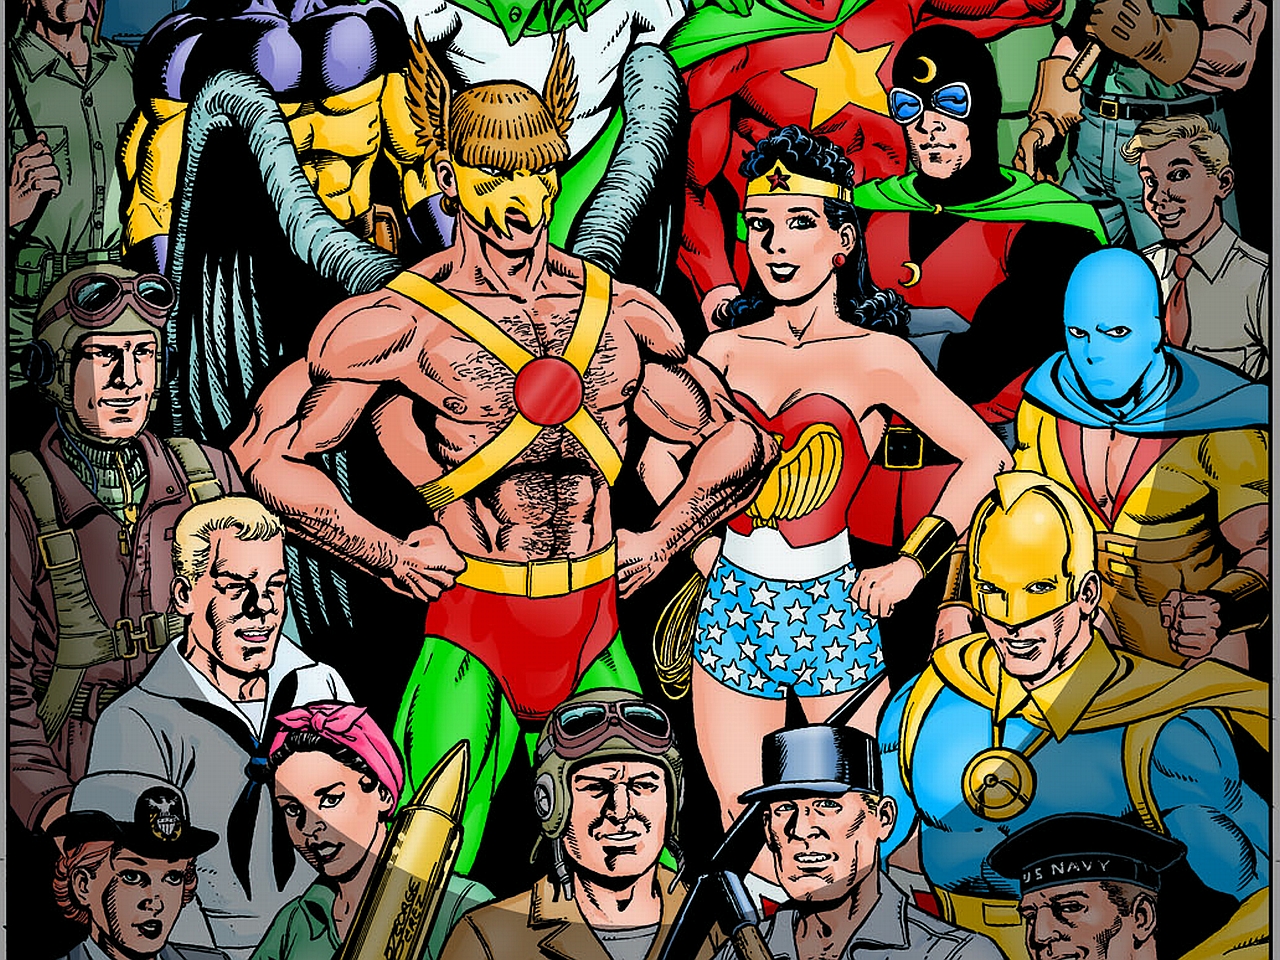 comics, justice league, all star squadron, atom (dc comics), captain midnight, carter hall, doctor fate (dc comics), doctor mid nite, earth 2 (dc comics), hawkman (dc comics), justice society of america, spectre (dc comics), starman (dc comics), wonder woman